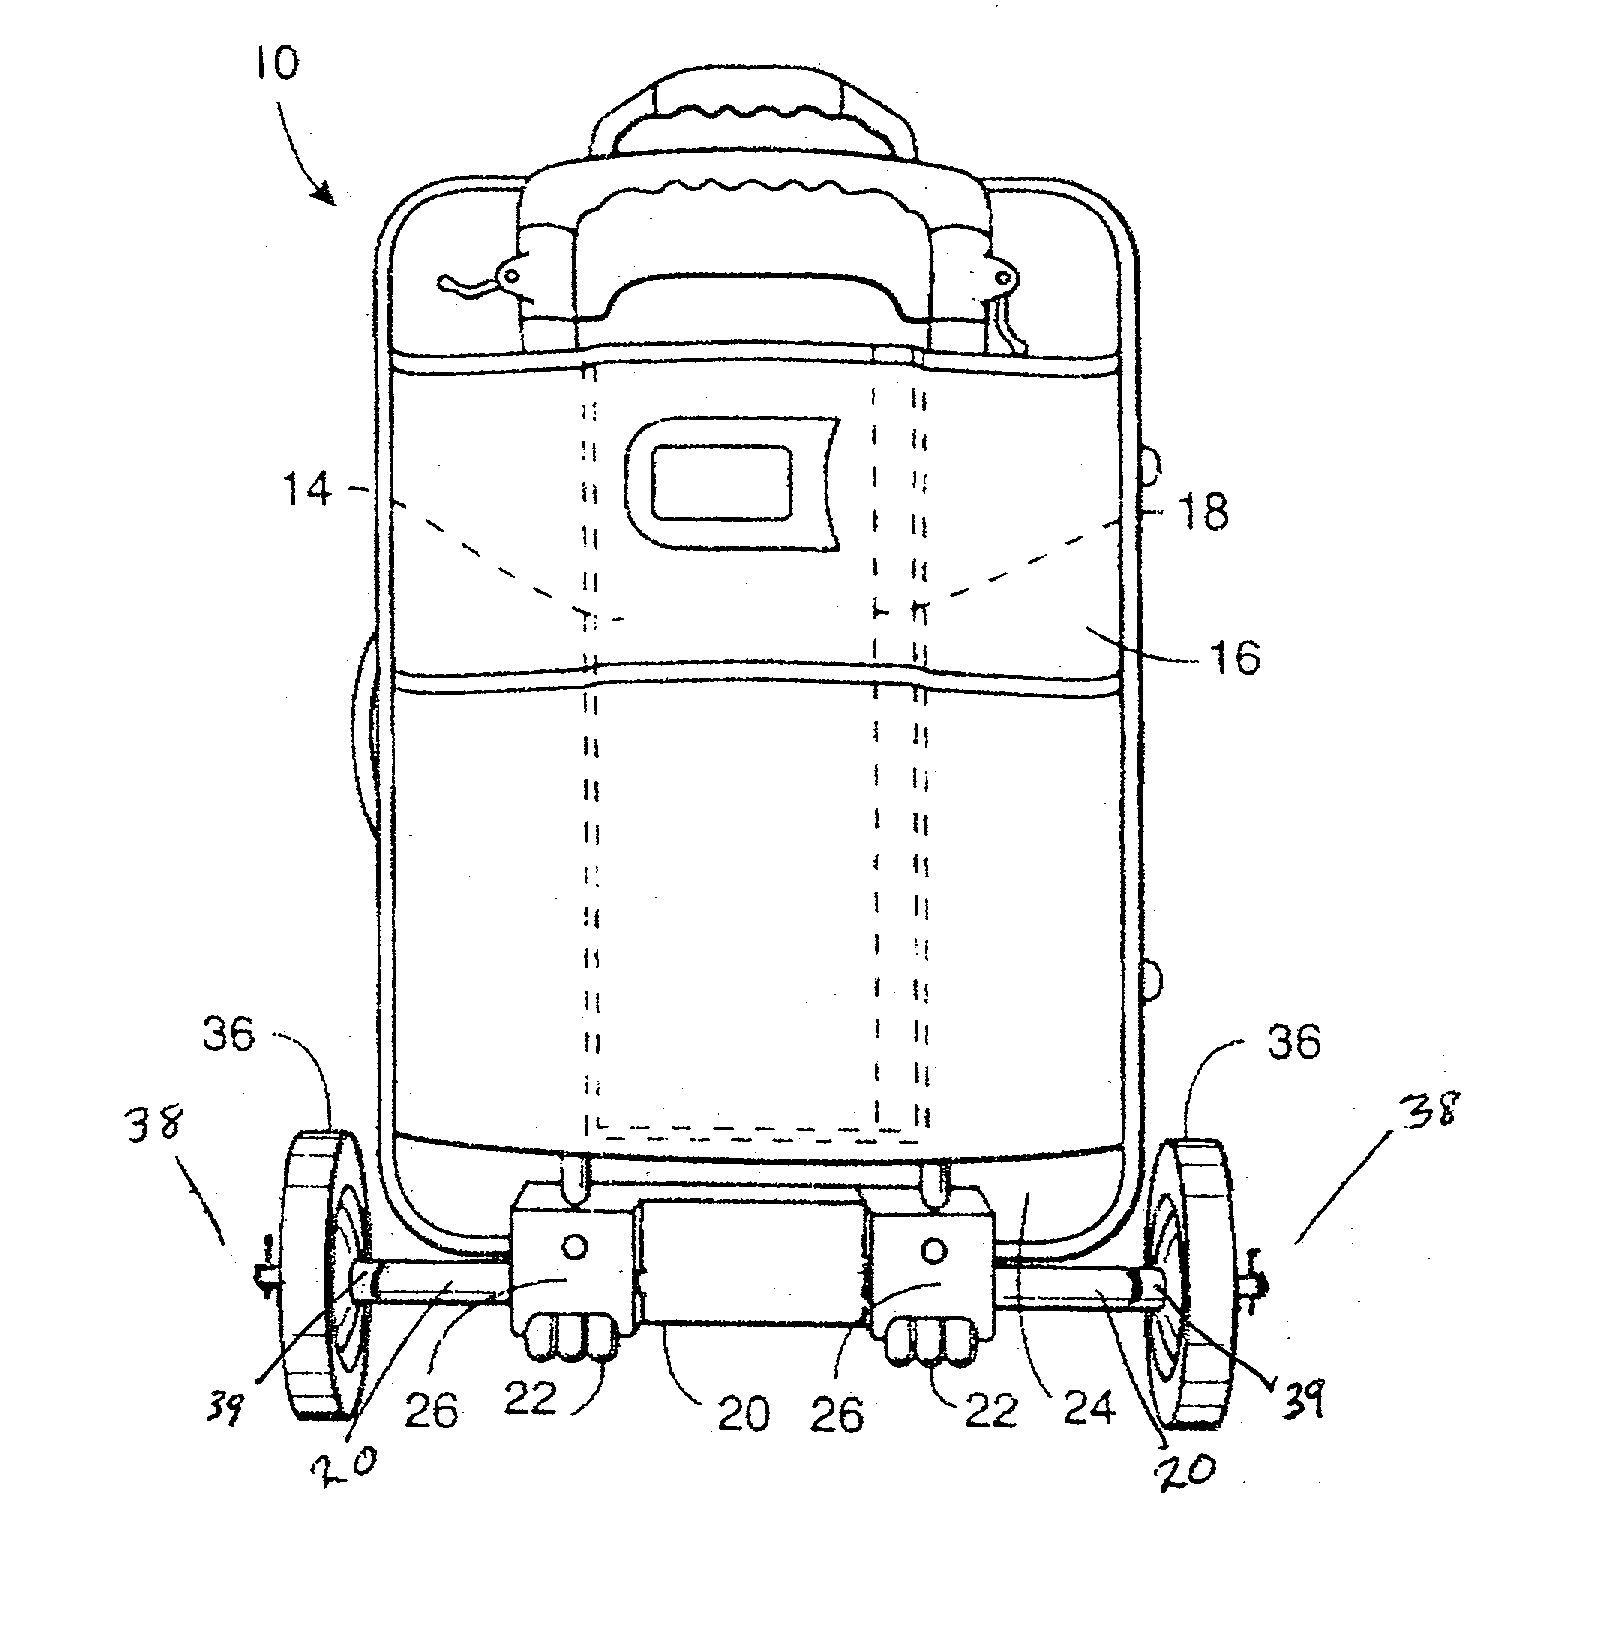 Removable large wheel assembly for luggage with small wheels